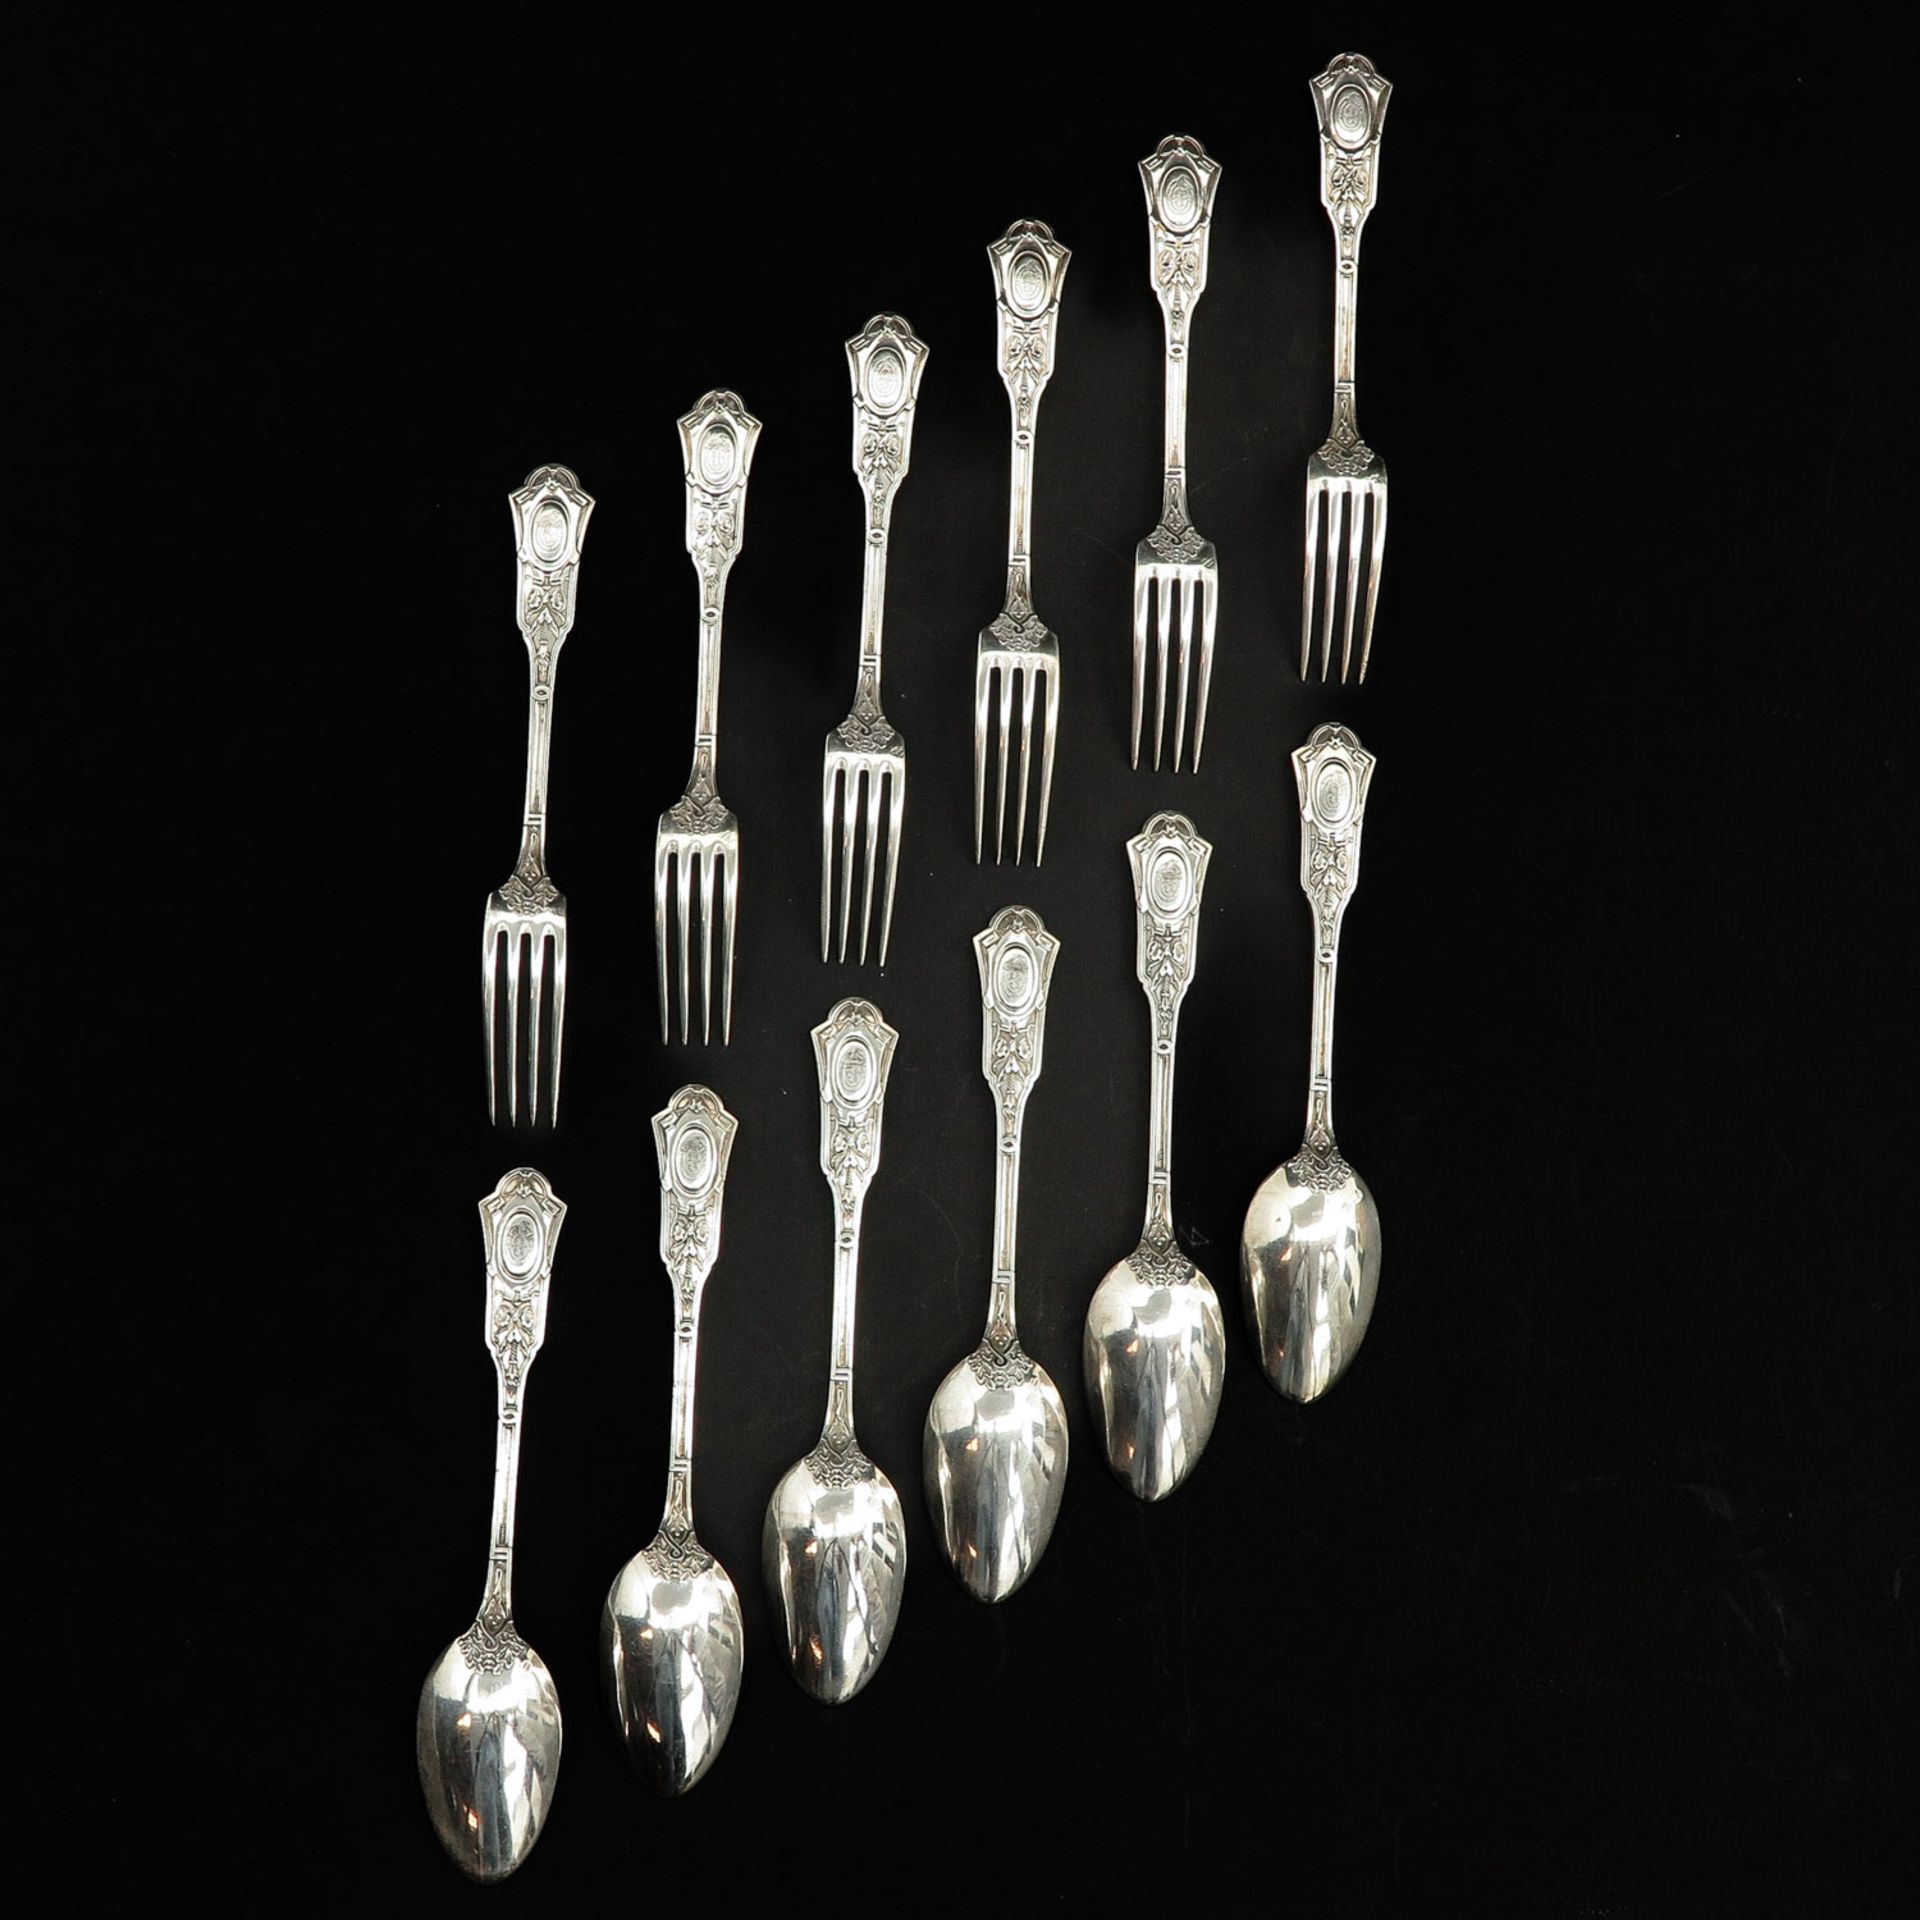 A Silver 6 Piece Place Cutlery Set - Image 2 of 8